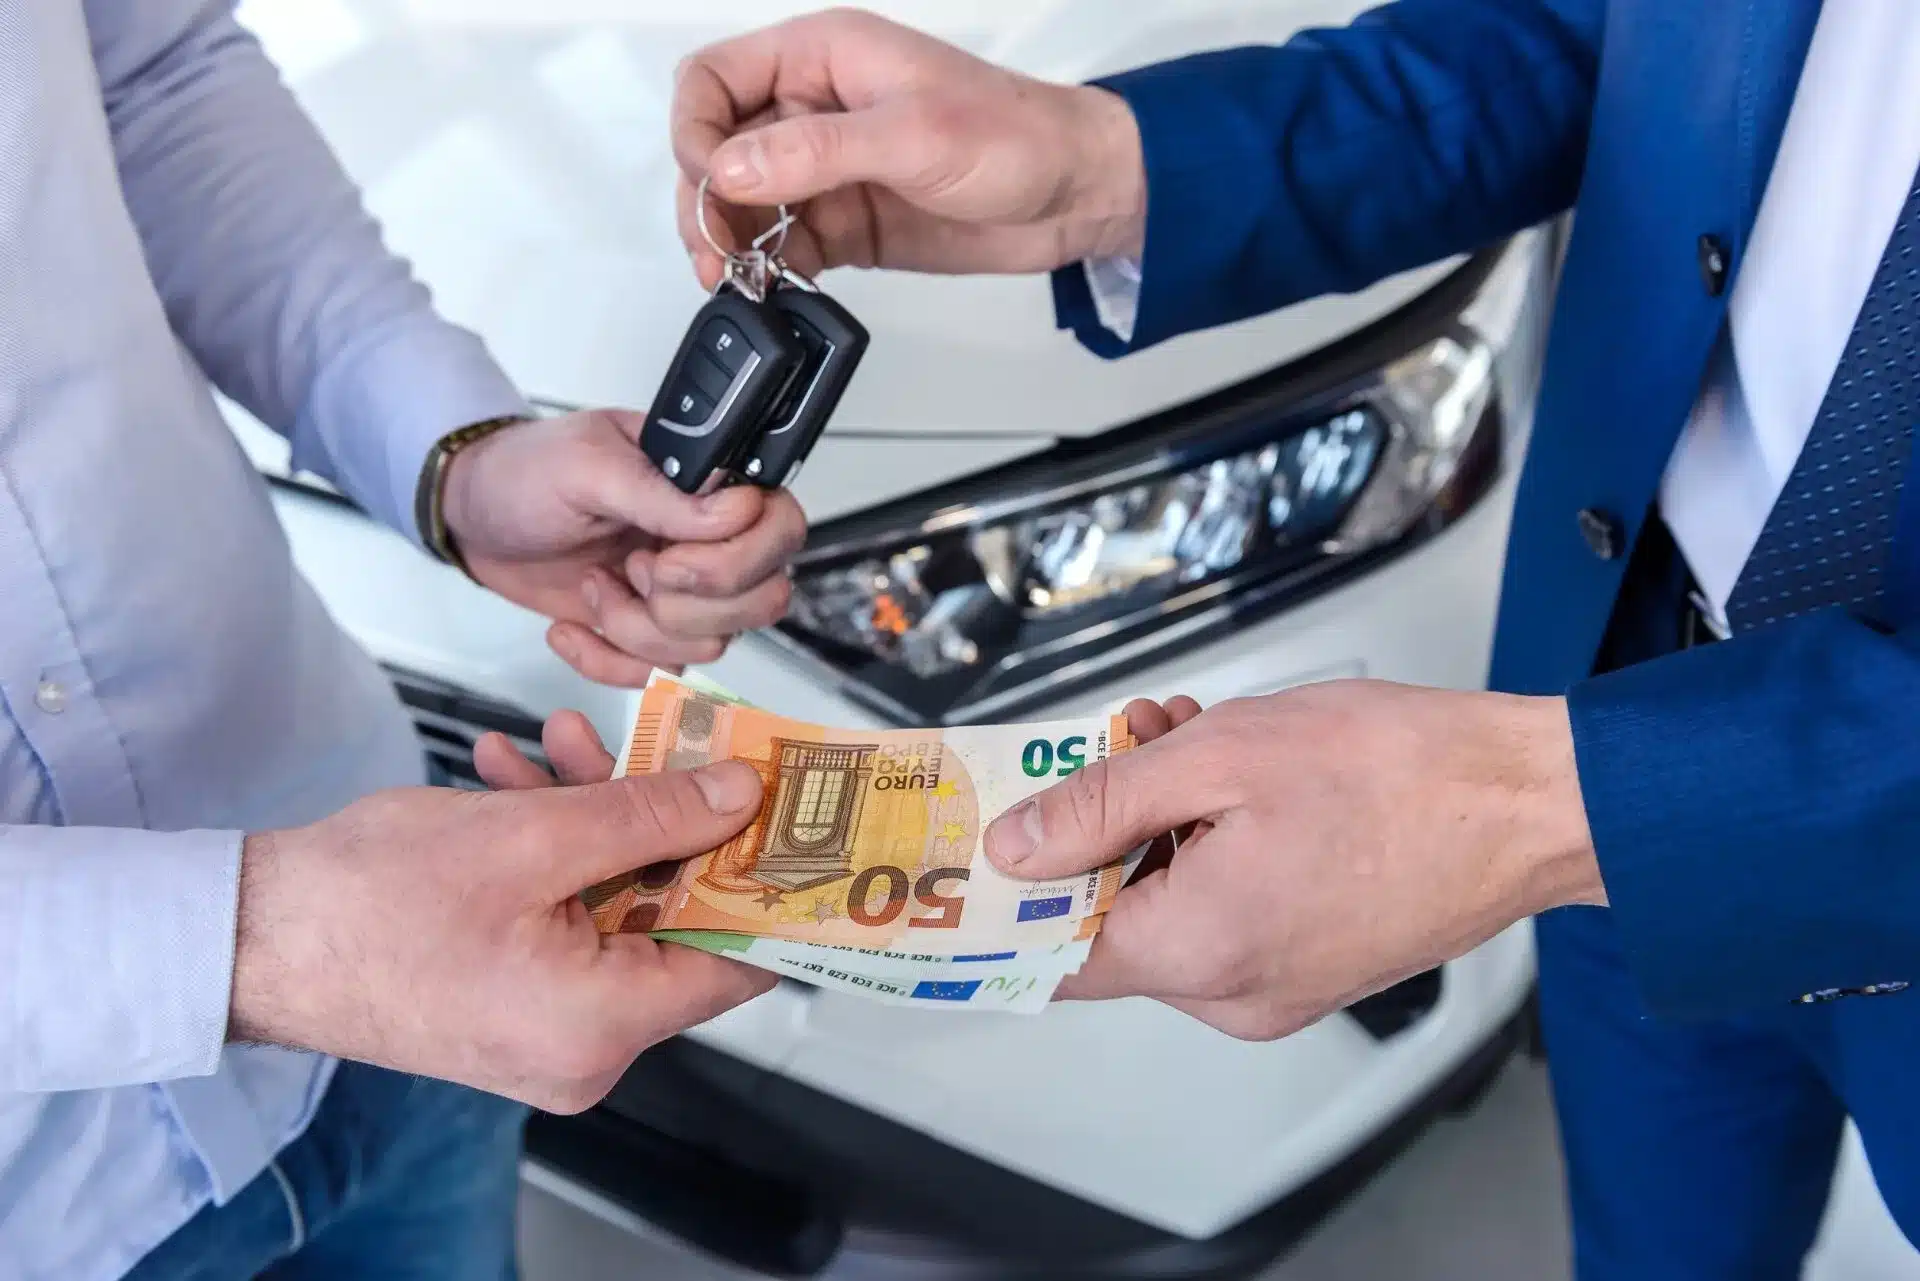 How To Sell Your Car For Cash Without A Title